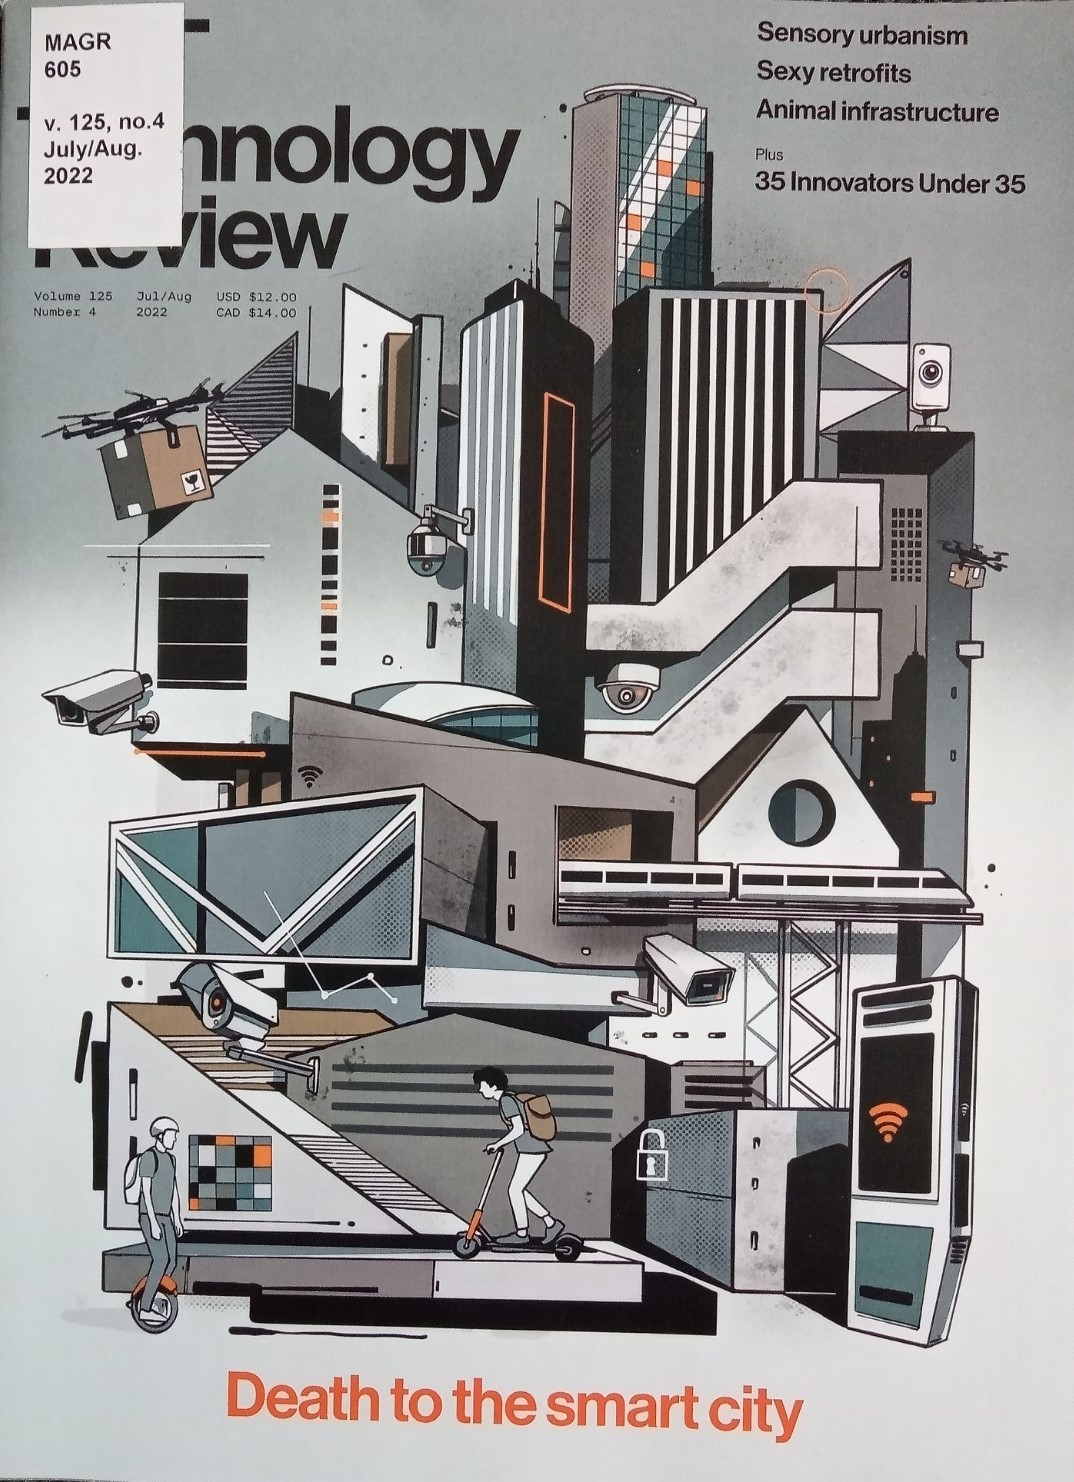 Front cover of MIT Technology Review v125 no 4 JulAug 2022